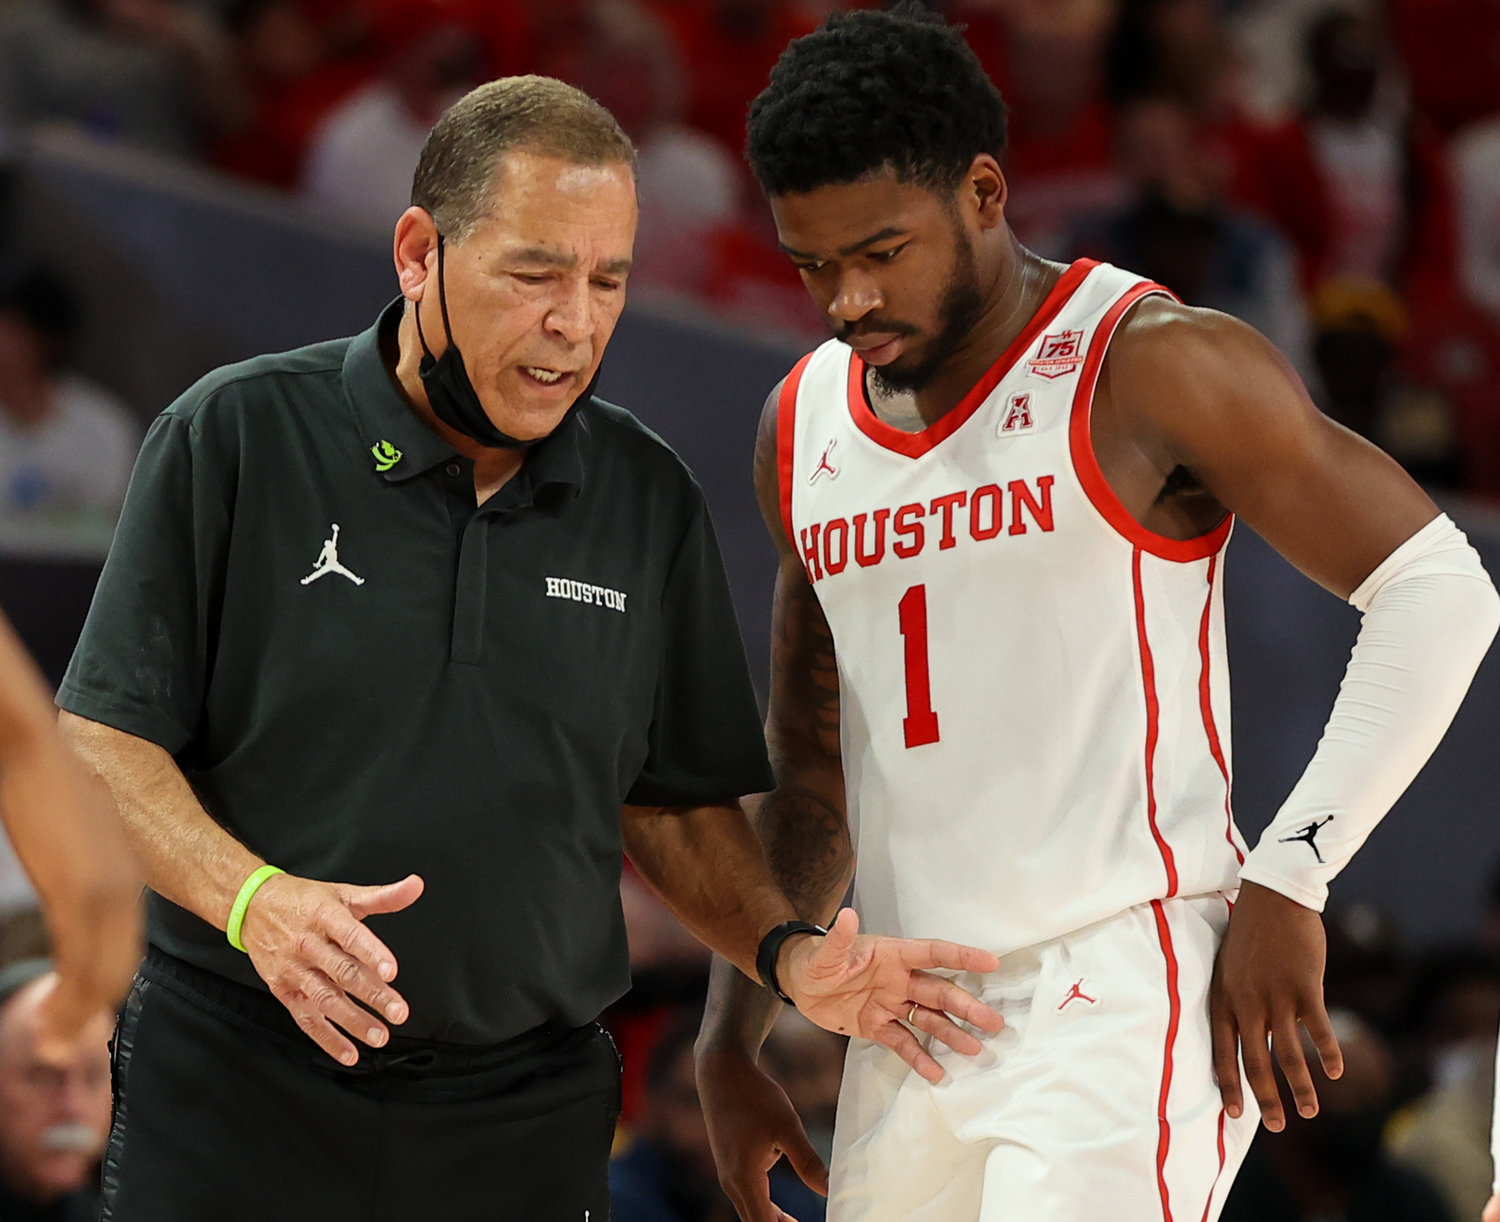 Houston Cougars head coach Kelvin Sampson talks with guard Jamal Shead (1) during an NCAA men’s basketball game between Houston and Wichita State on Jan. 8, 2022 in Houston, Texas.